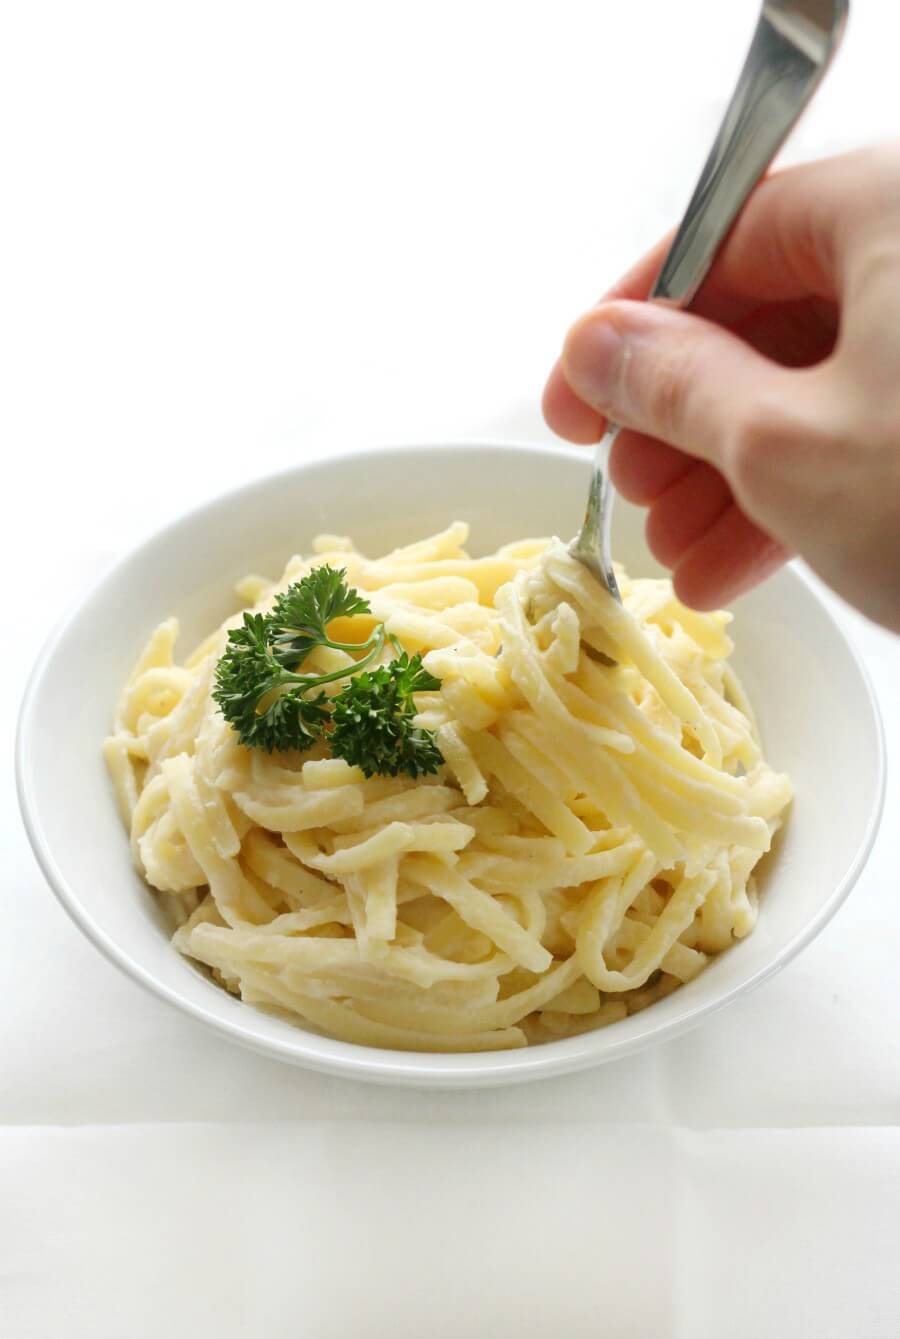 hand and fork with bowl of gluten-free fettuccine alfredo